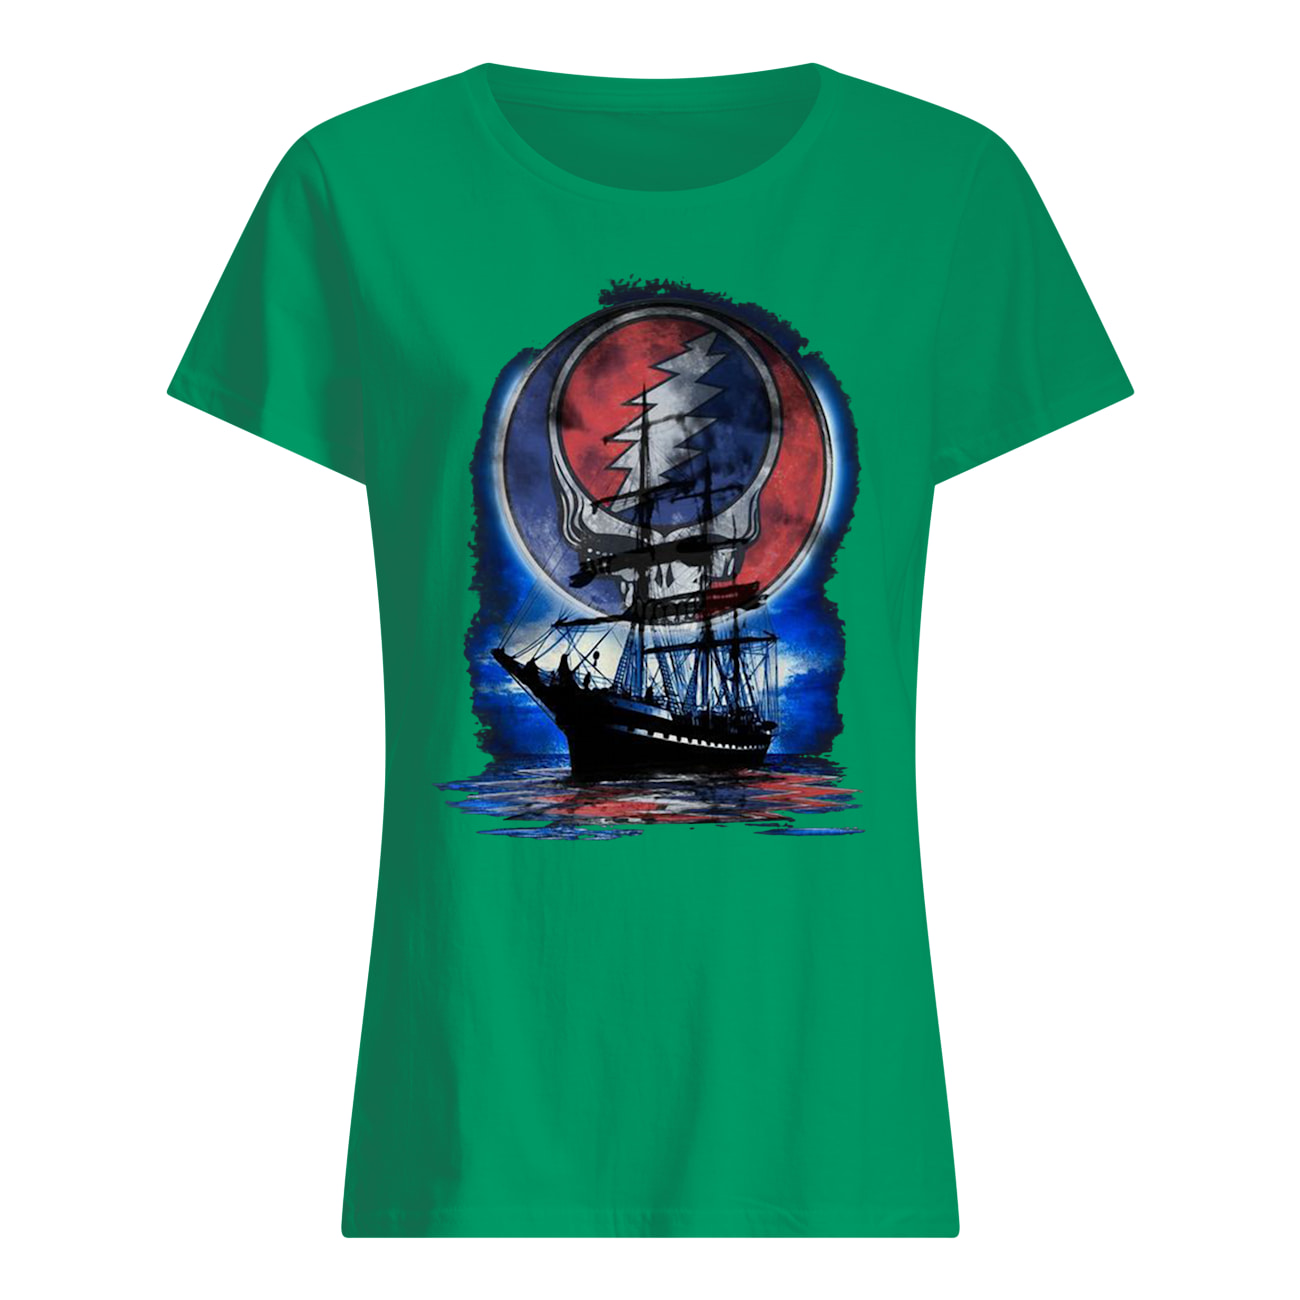 Steal your face moon boat live beyond limits quote relaxing womens shirt